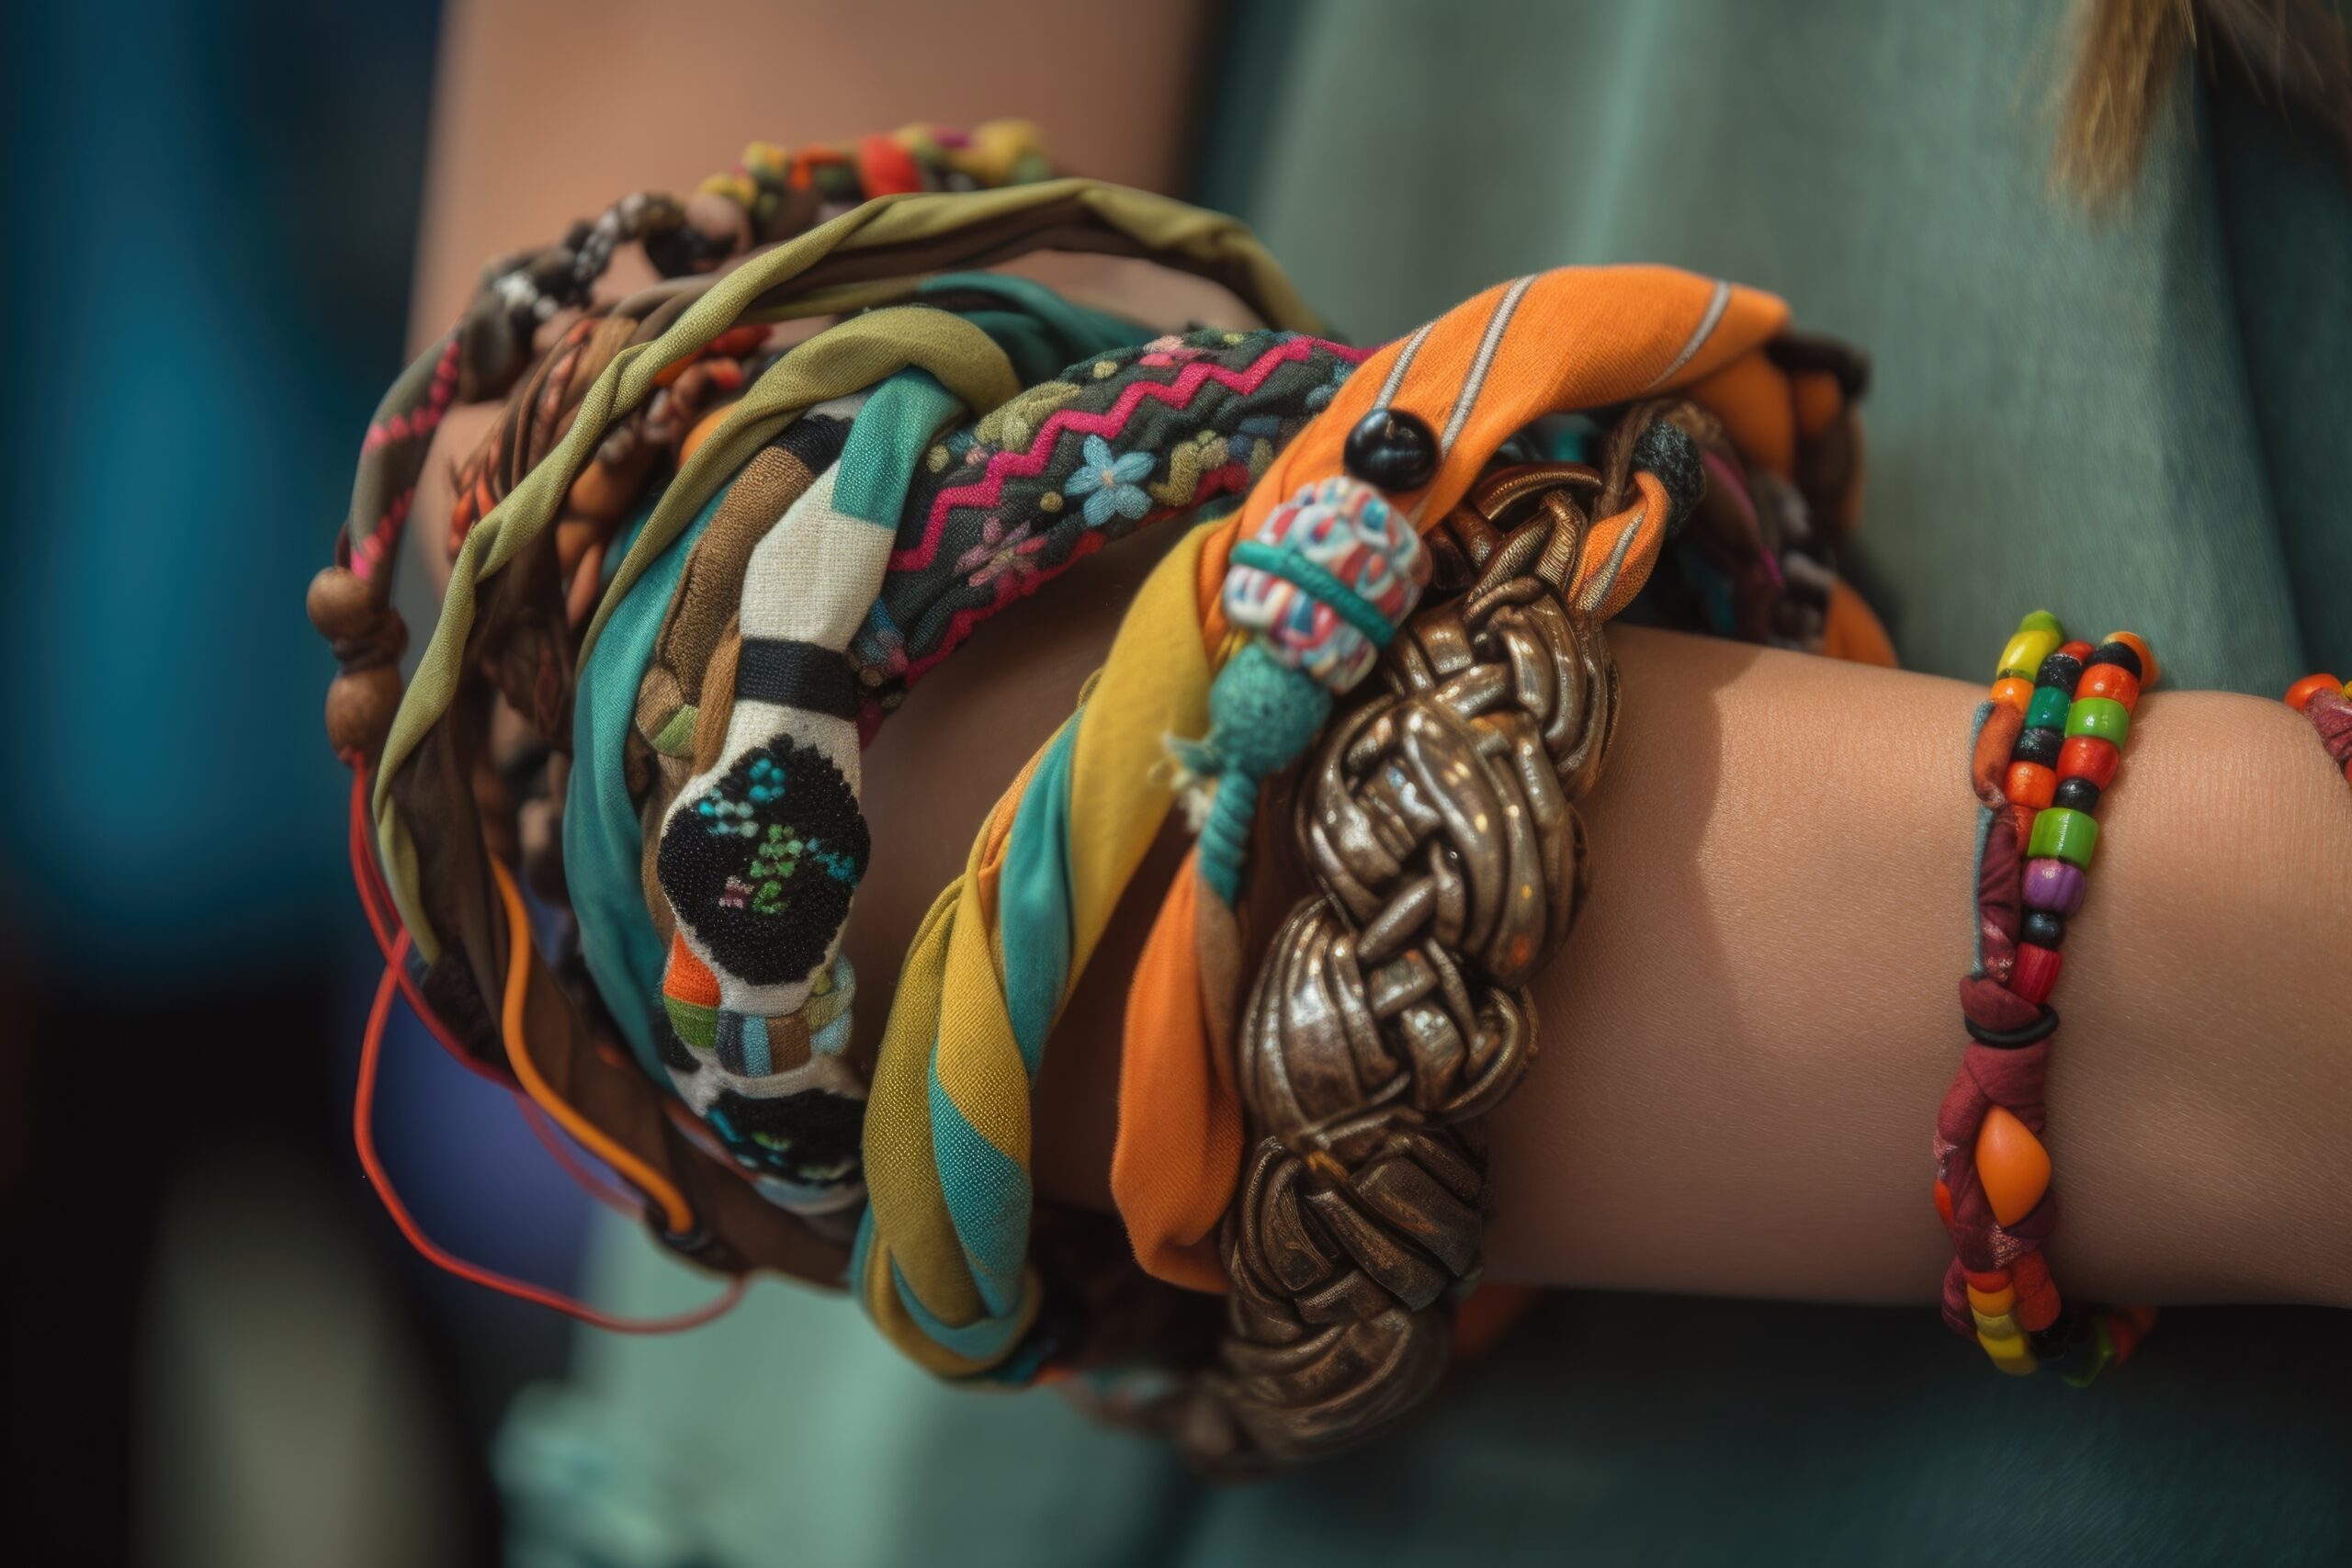 upcycling and repurposing clothes into unique and creative accessories, such as braid bracelets or head wraps